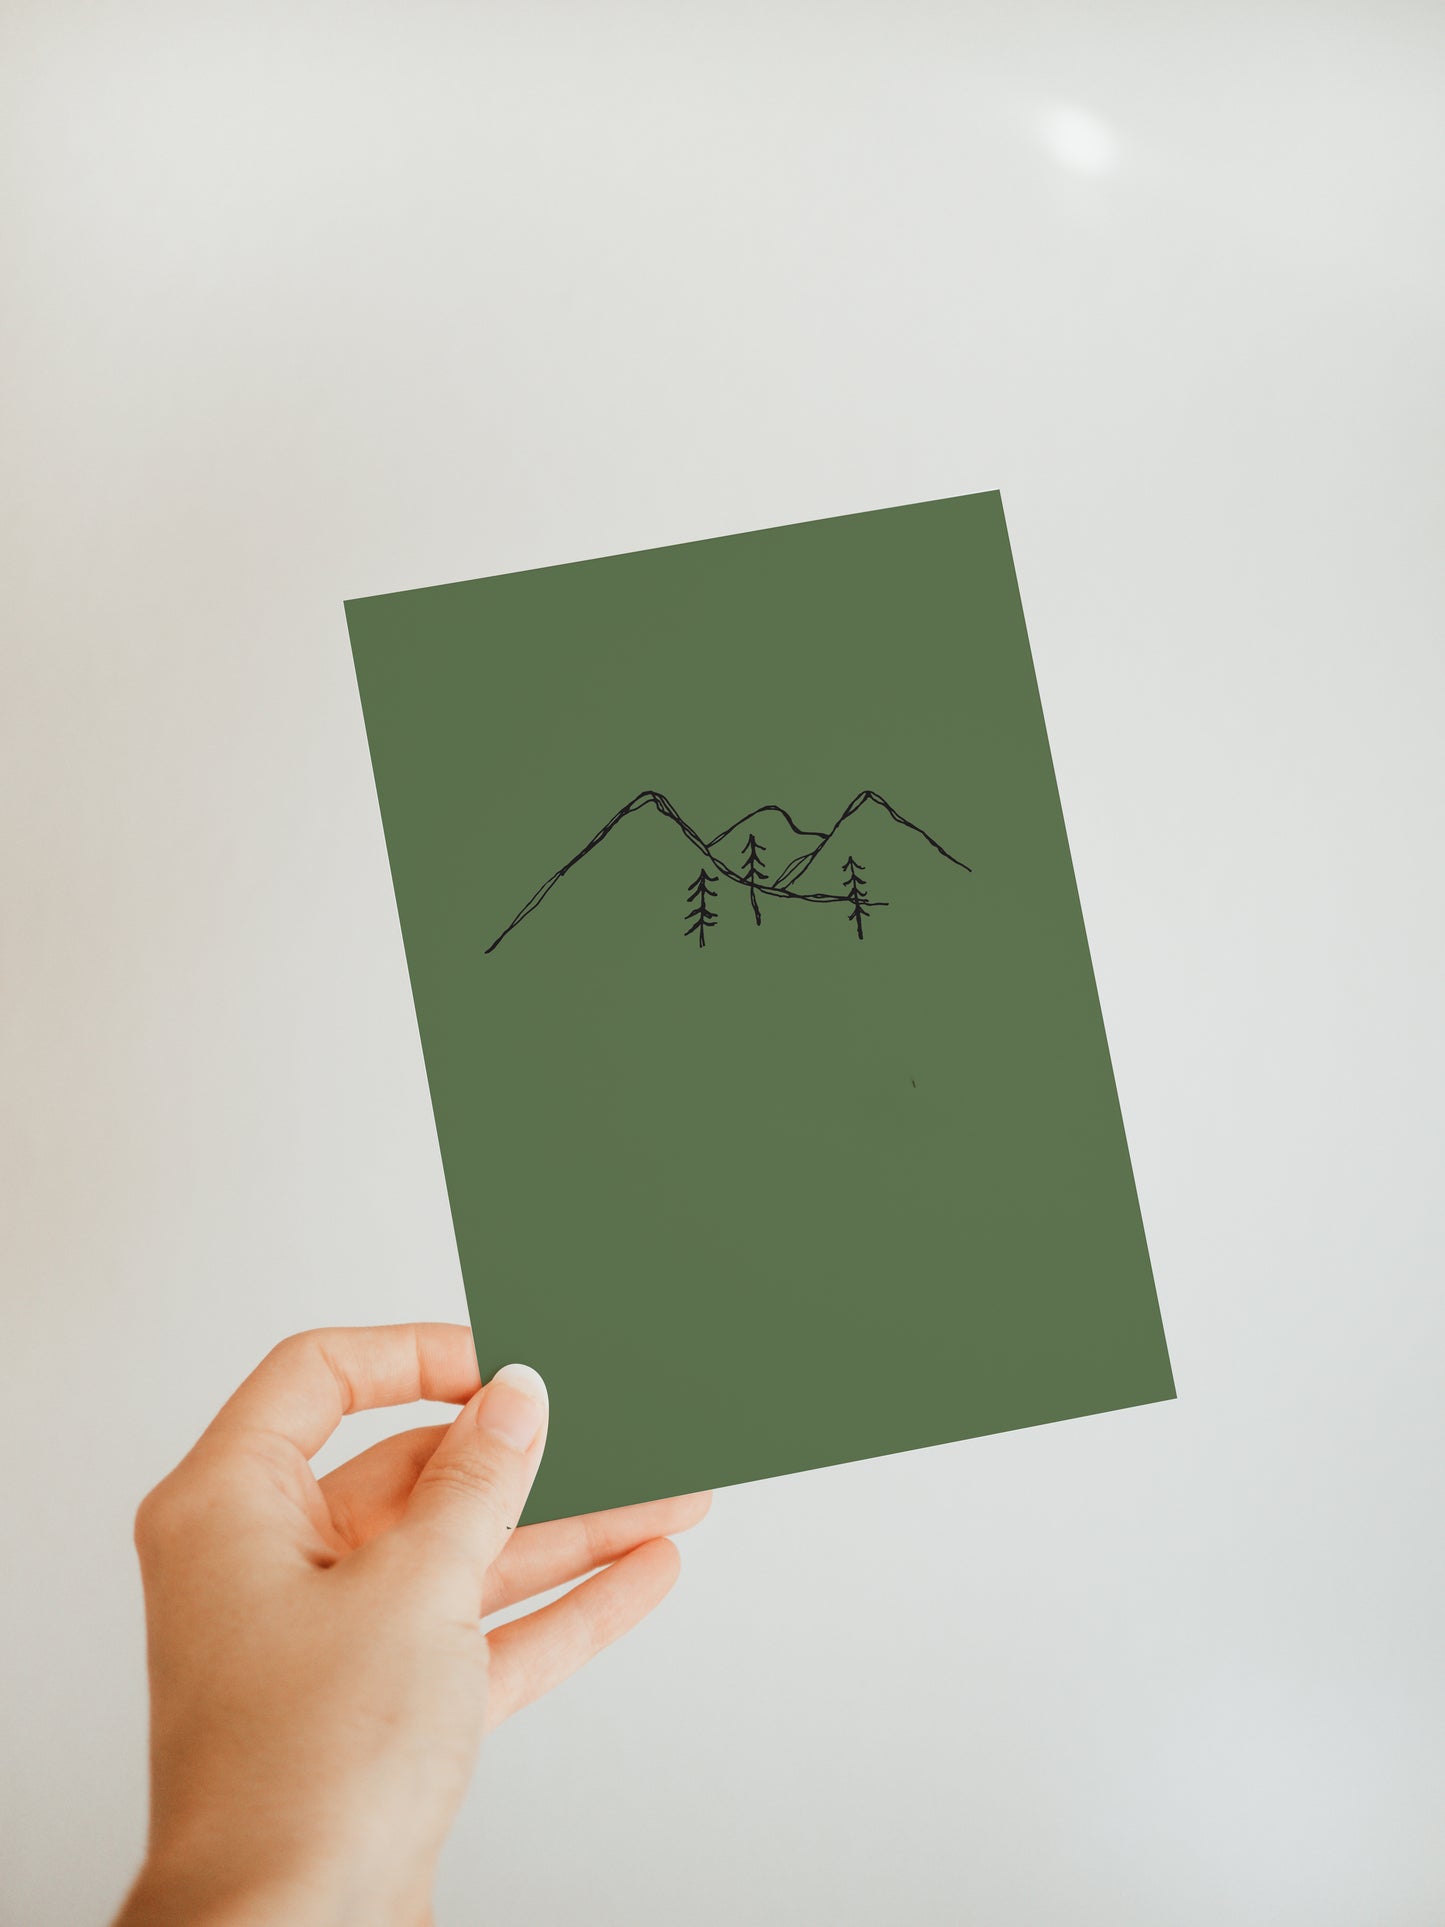 hand holding a forest green greeting card with a simple mountain range sketched design and three small pine trees in front of the mountains